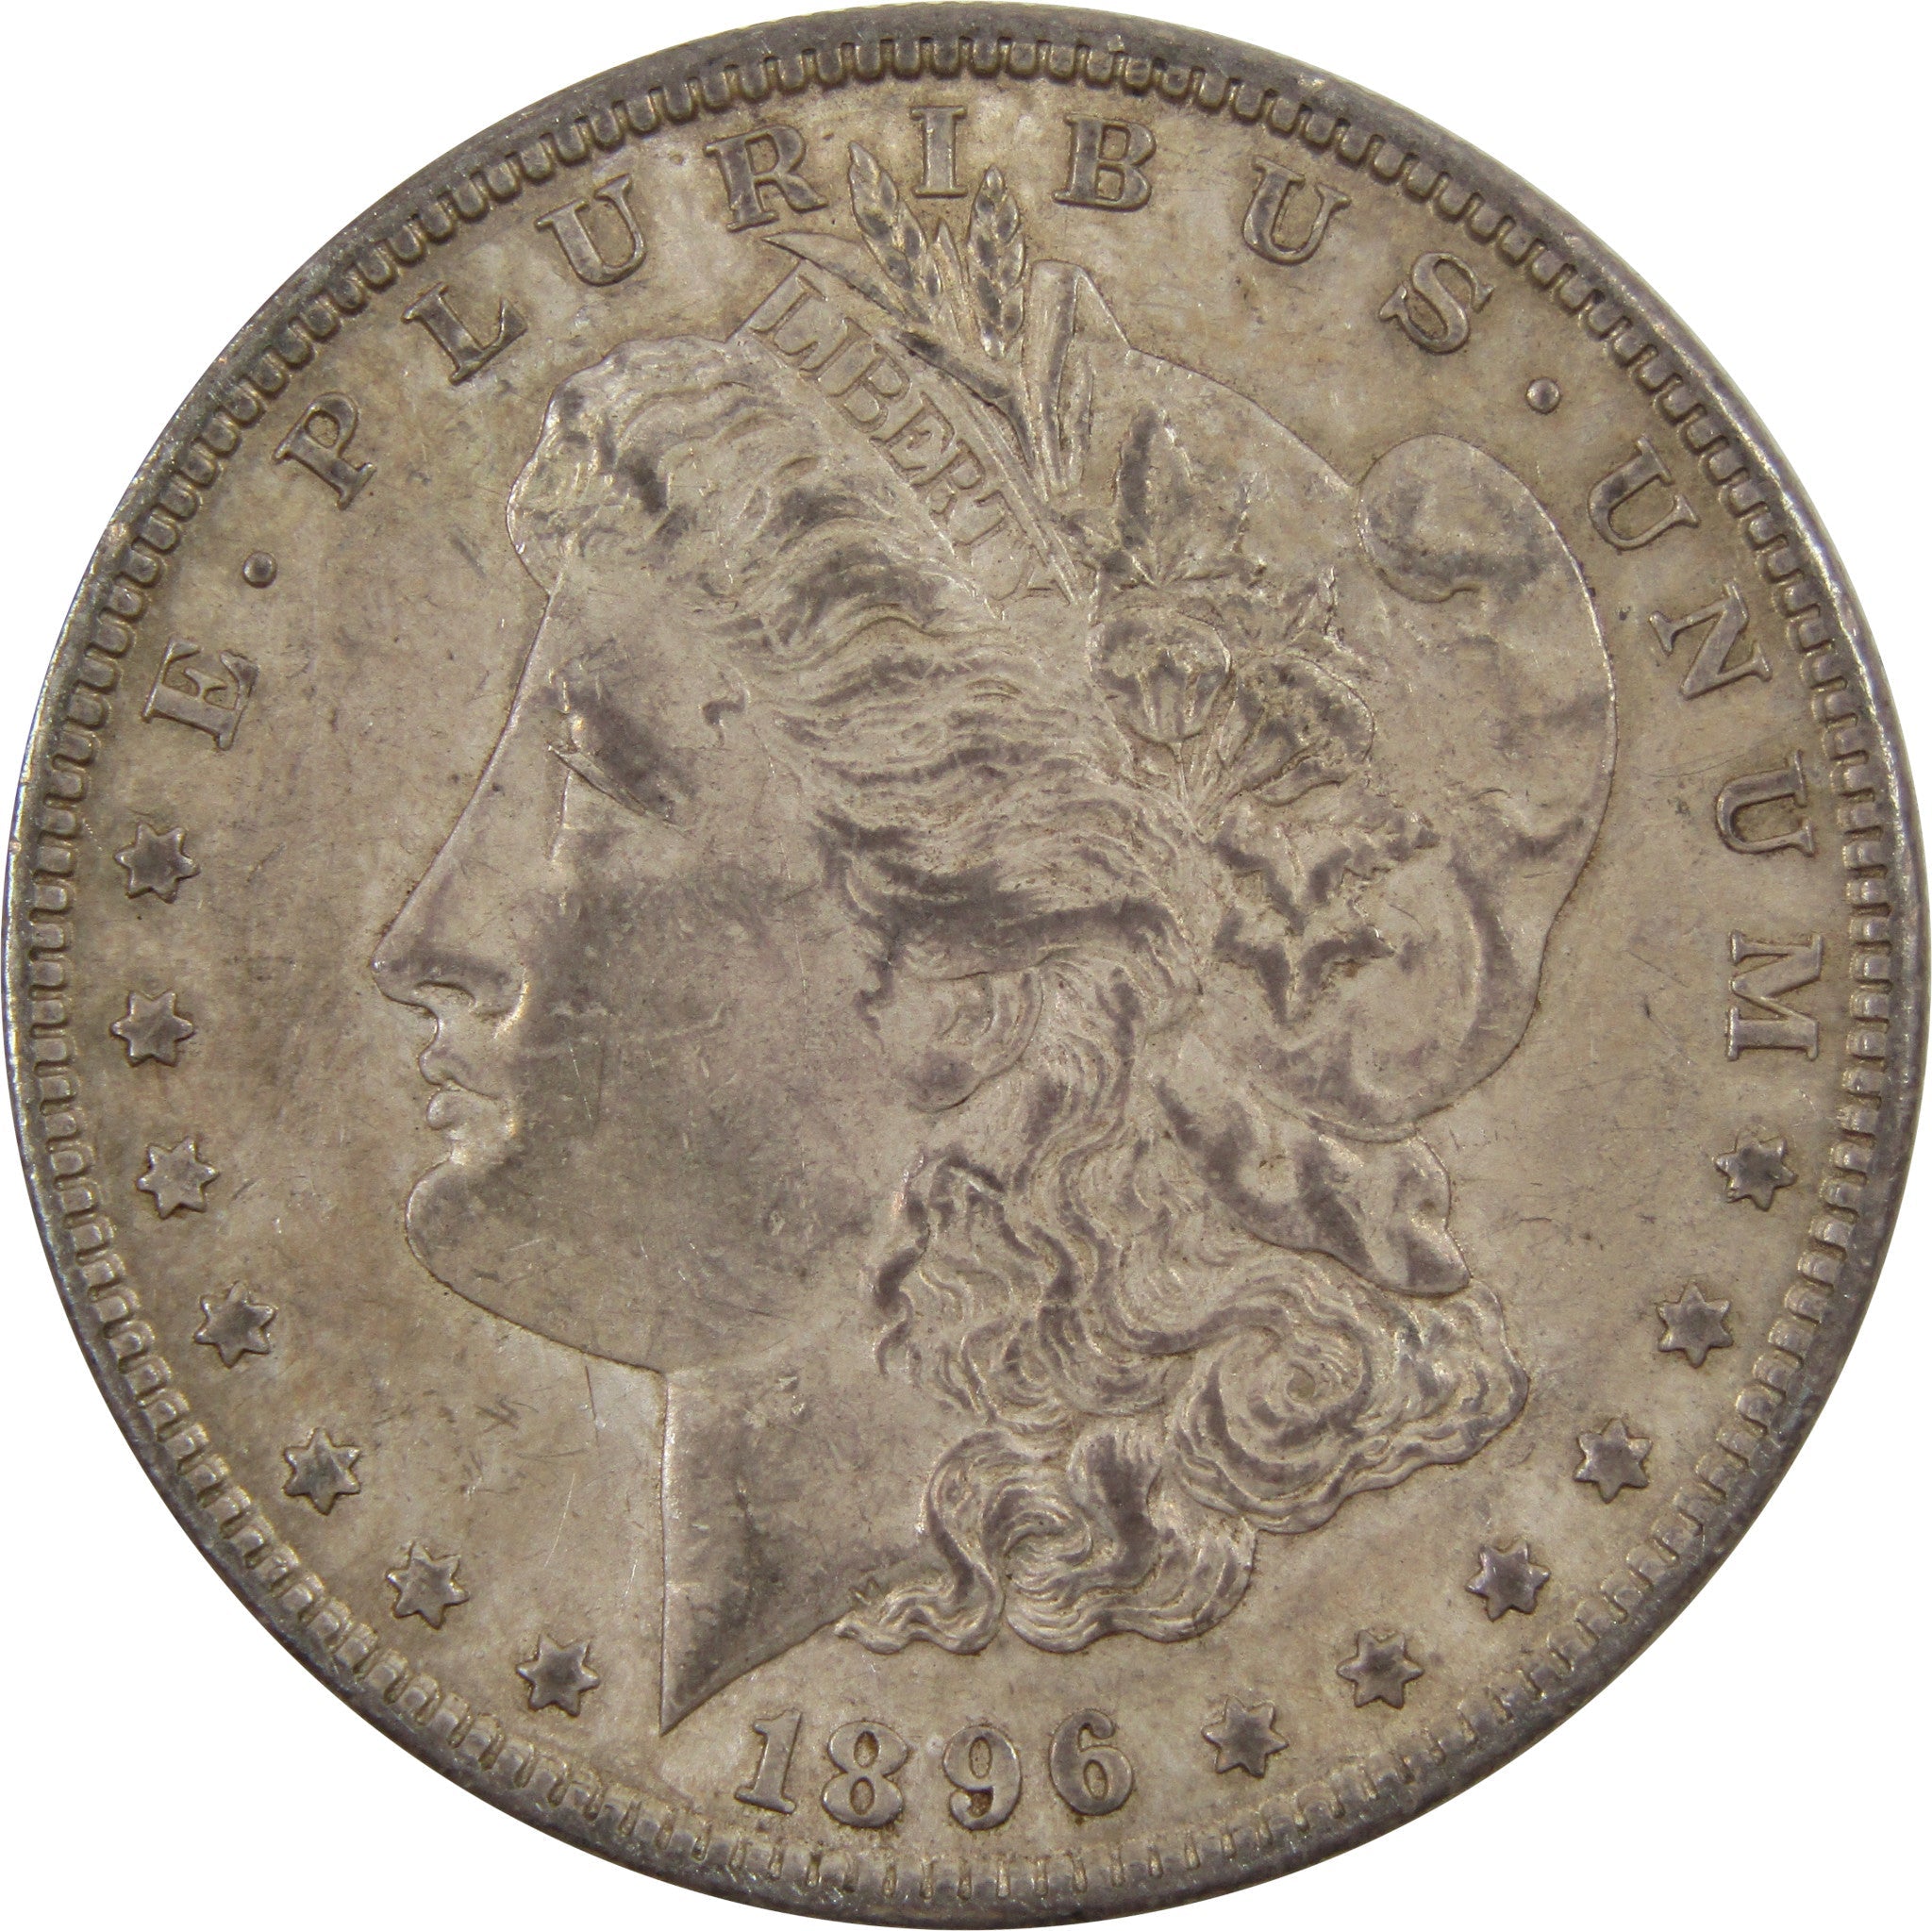 1896 Morgan Dollar AU About Uncirculated 90% Silver $1 Coin SKU:I5488 - Morgan coin - Morgan silver dollar - Morgan silver dollar for sale - Profile Coins &amp; Collectibles